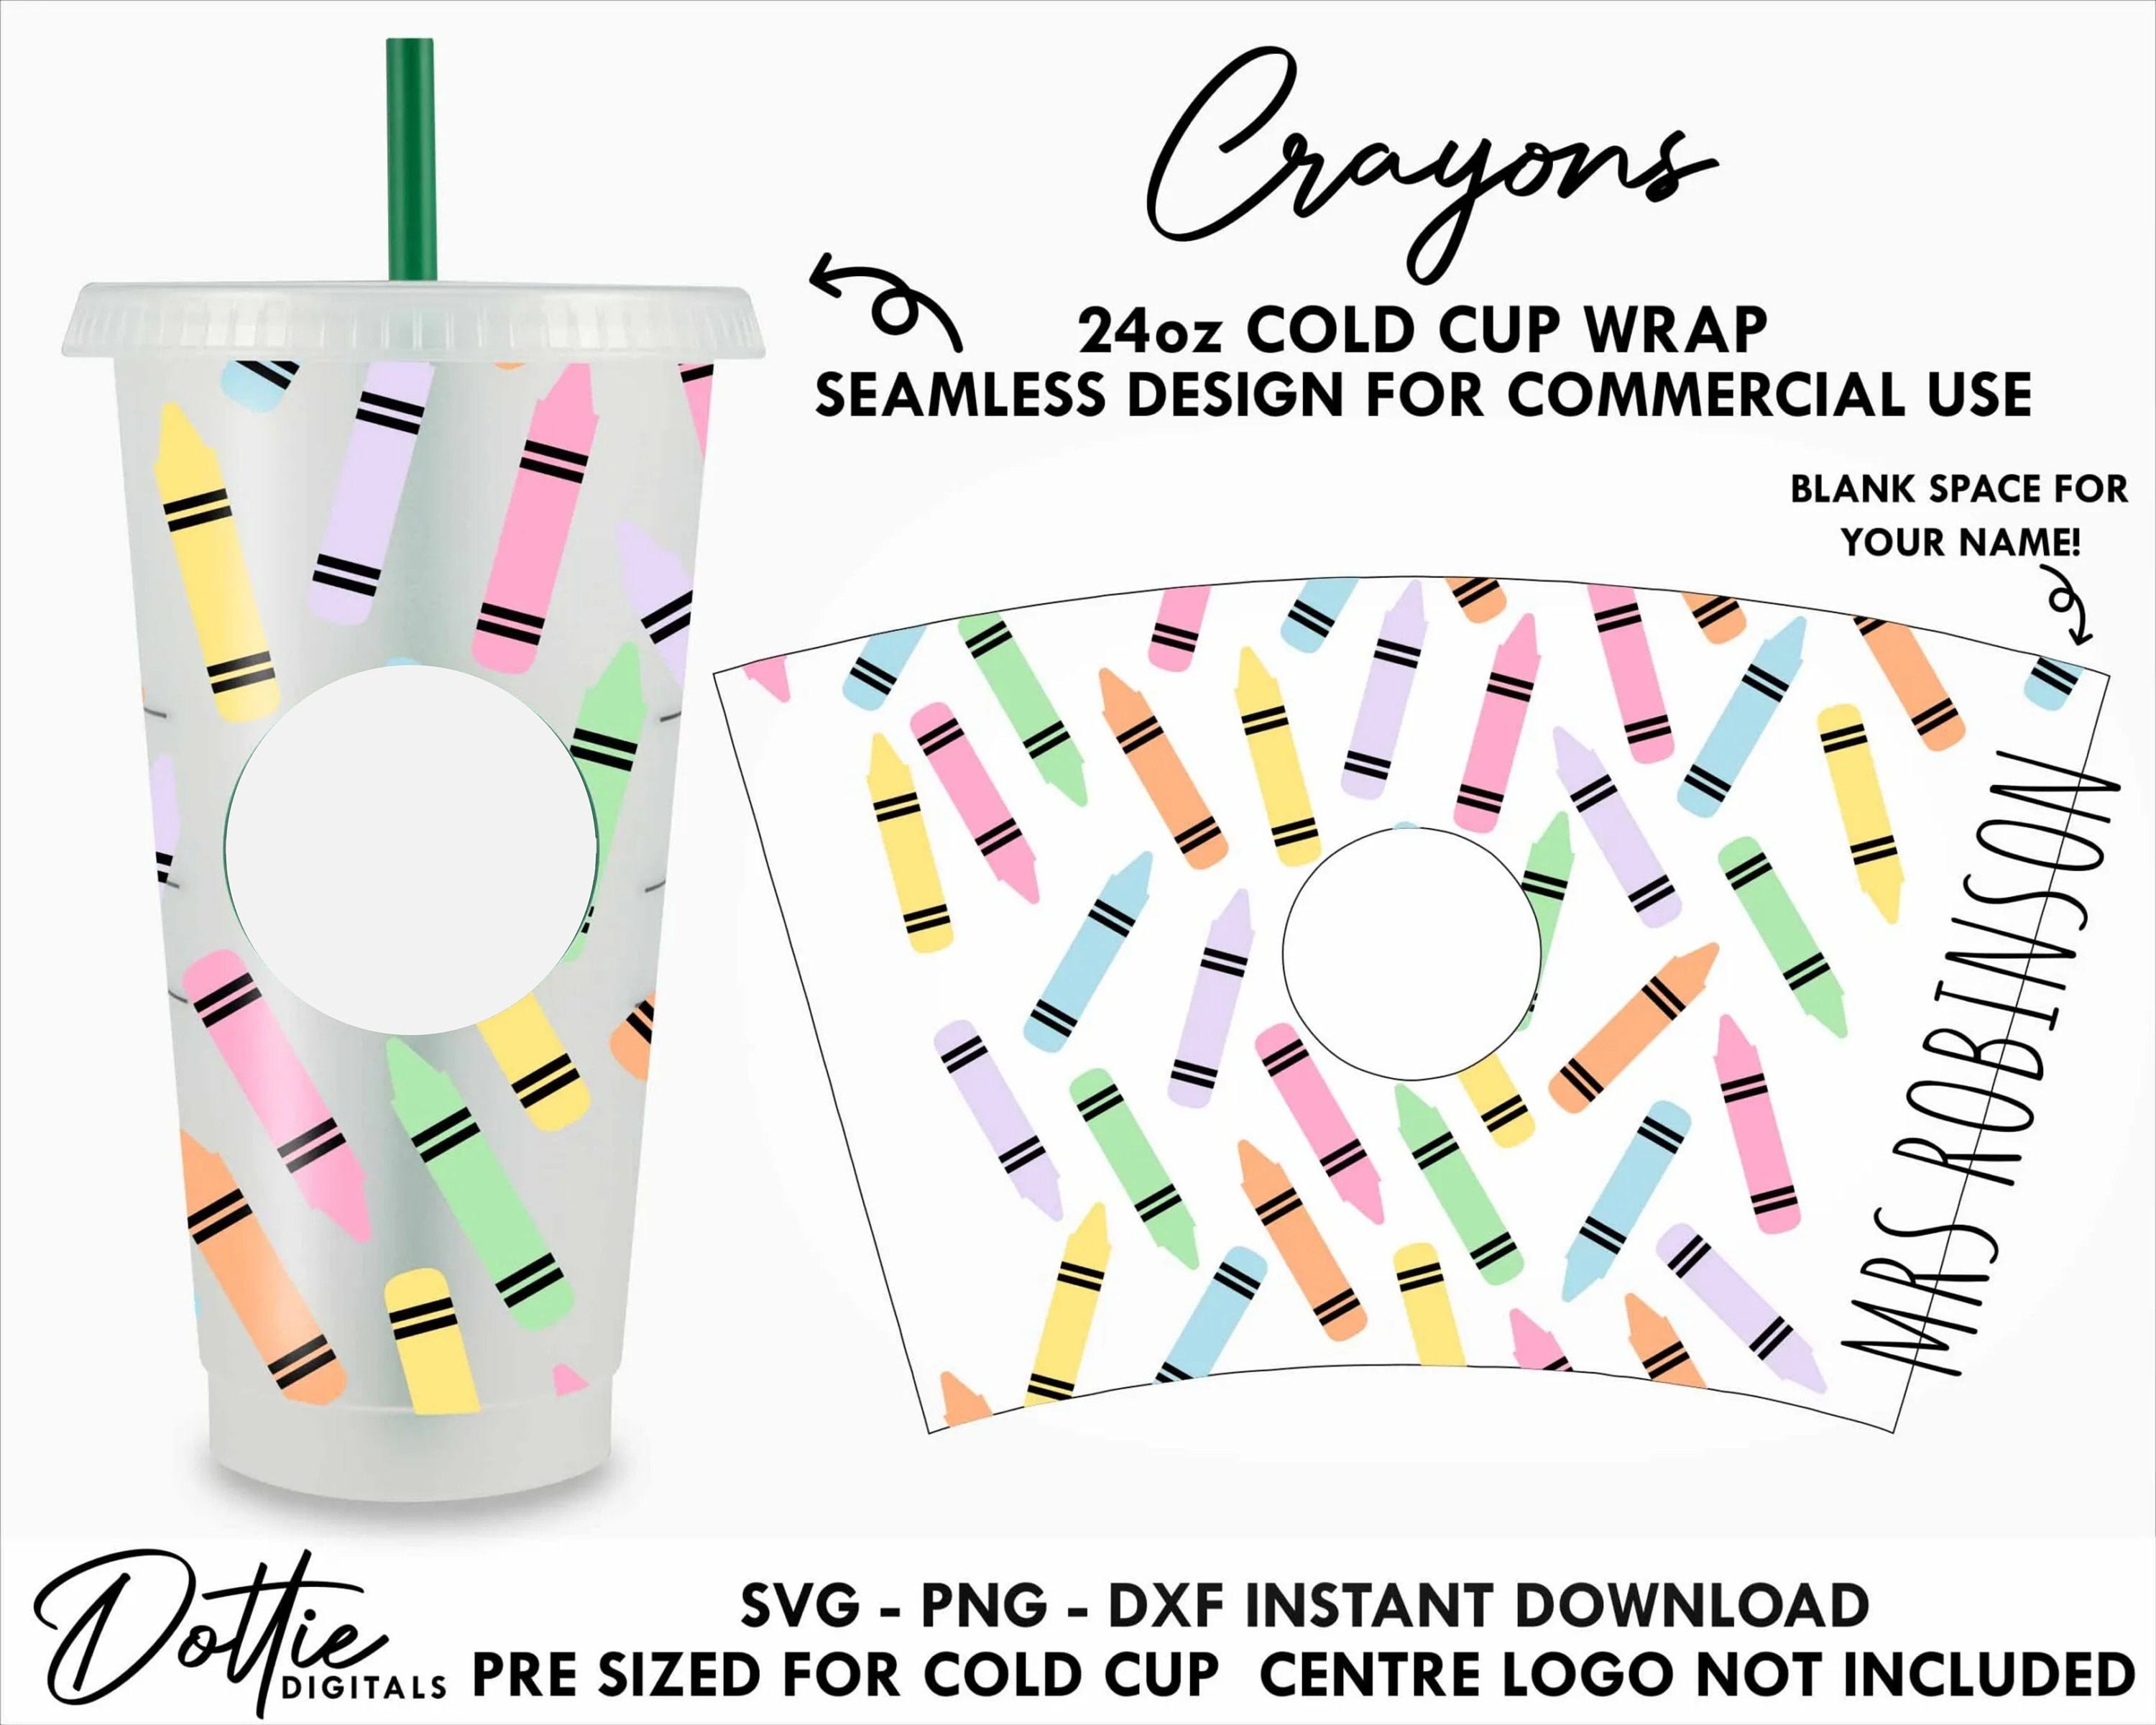 Crayons Name Gap Sbux Cold Cup SVG PNG DXF Teacher School Art Cutting File 24oz Venti Cup Instant Digital Download Svg for Cricut